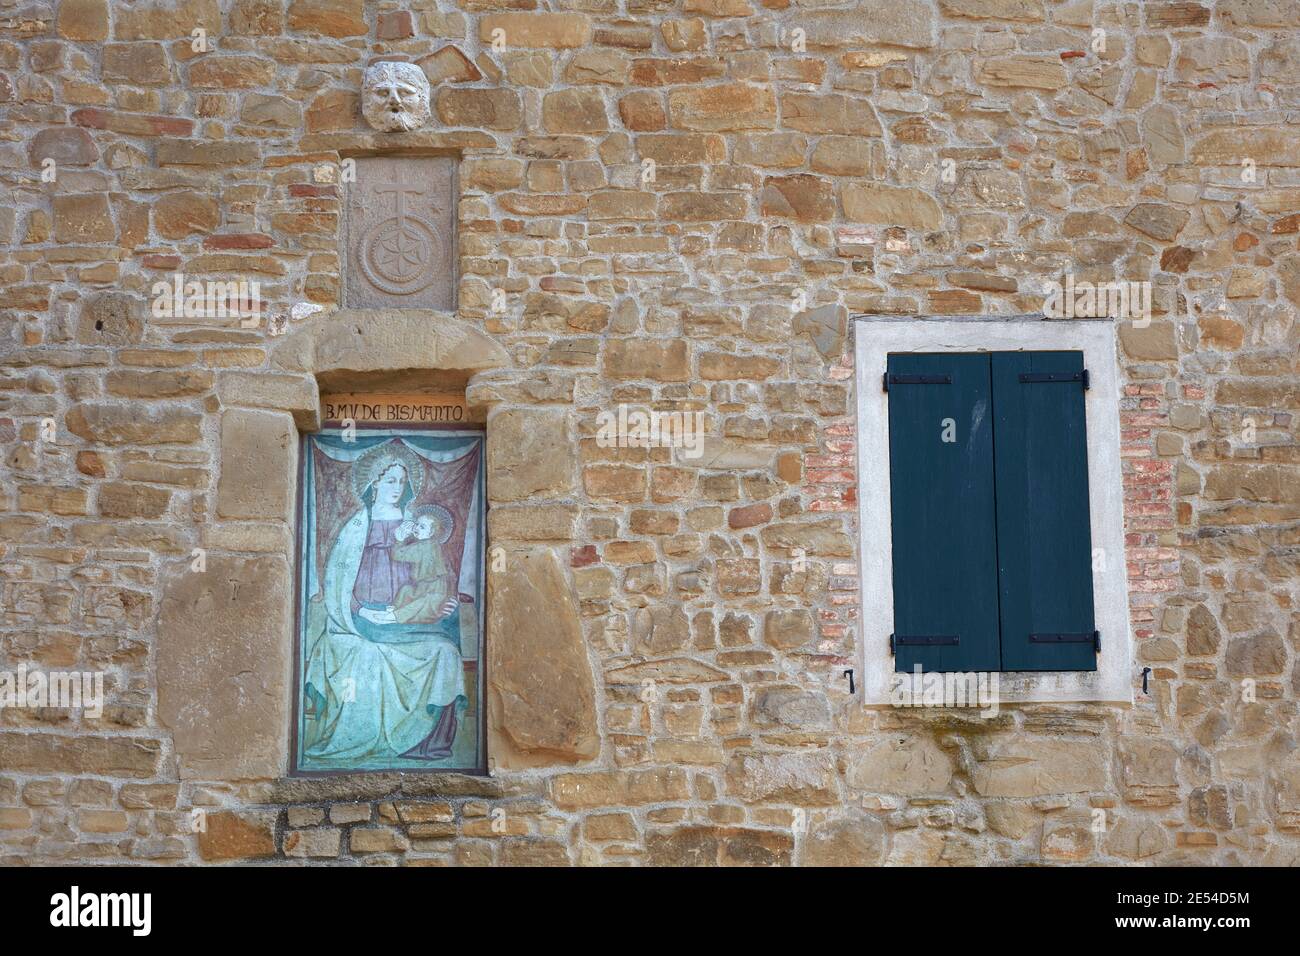 An ancient painting, a religious icon of the 'Madonna of Bismantova' on the wall of a traditional stone house. Casina, Emilia Romagna, Italy. Stock Photo